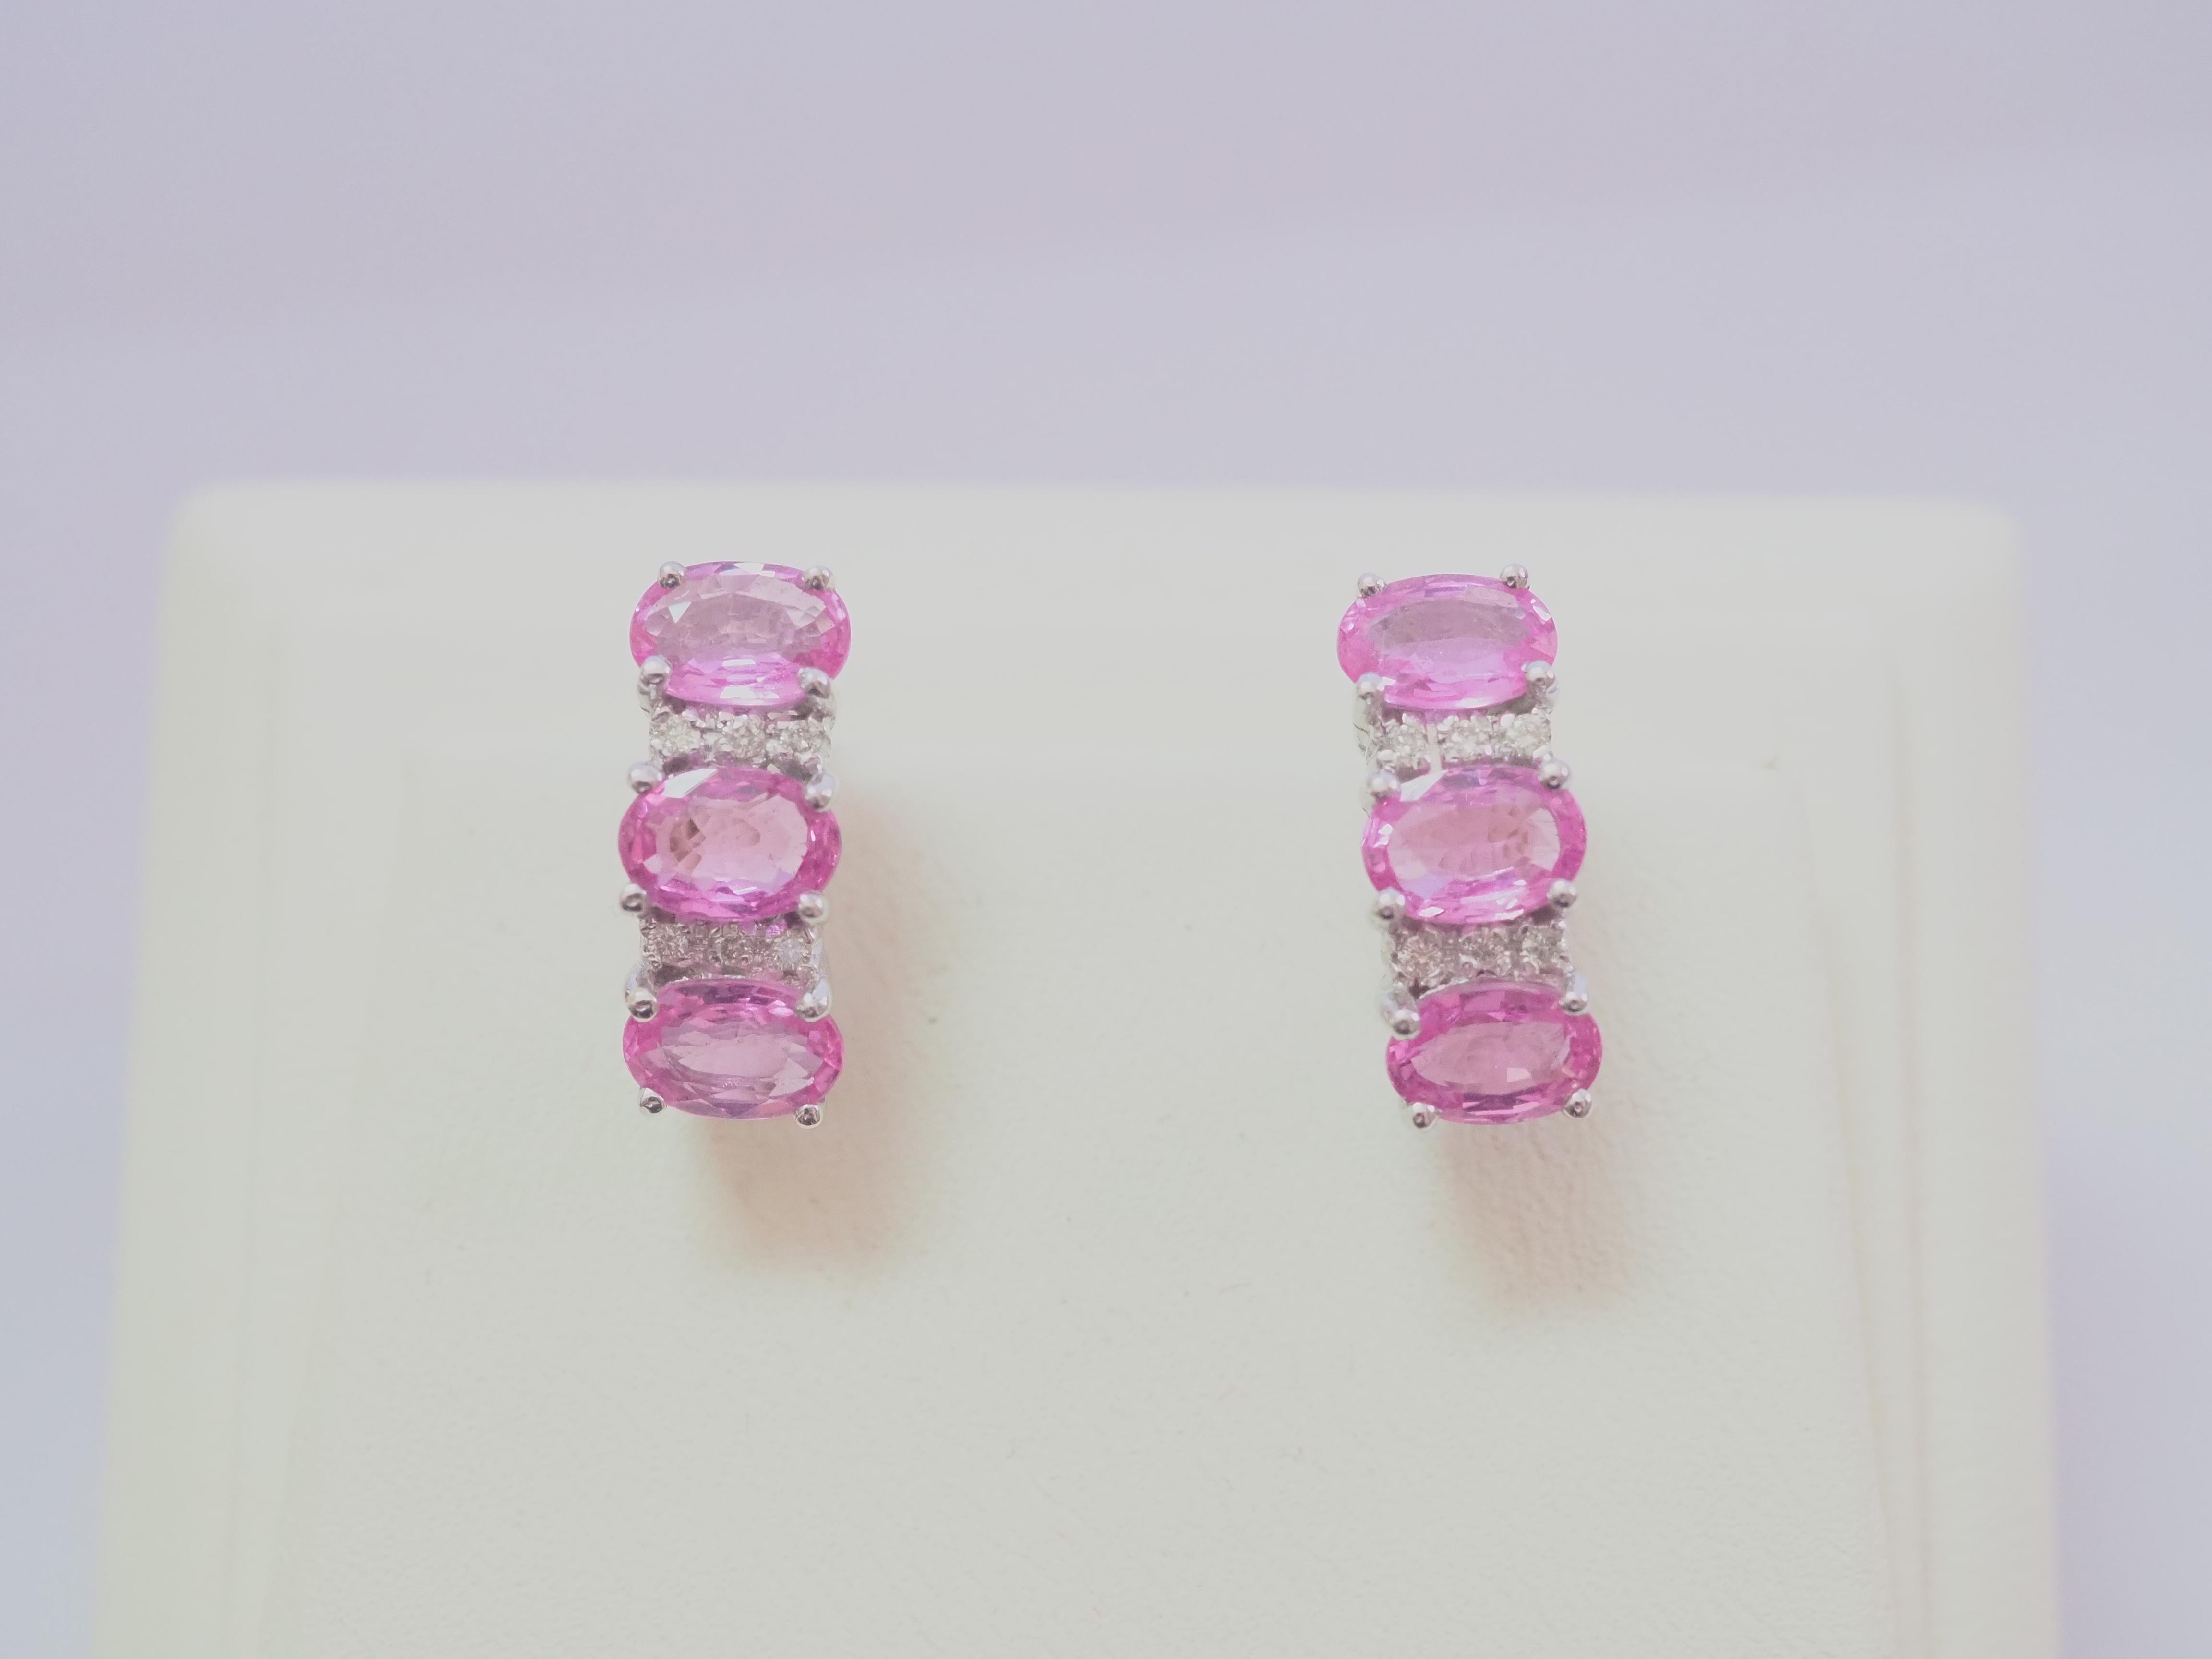 Beautiful latch back earrings made in the 1990's and has never been worn. The earrings have the shape of half circular hoop. There are 6 decent sizes of oval pink sapphires in total and therefore 3 for each ear. The sapphires are all set in prong